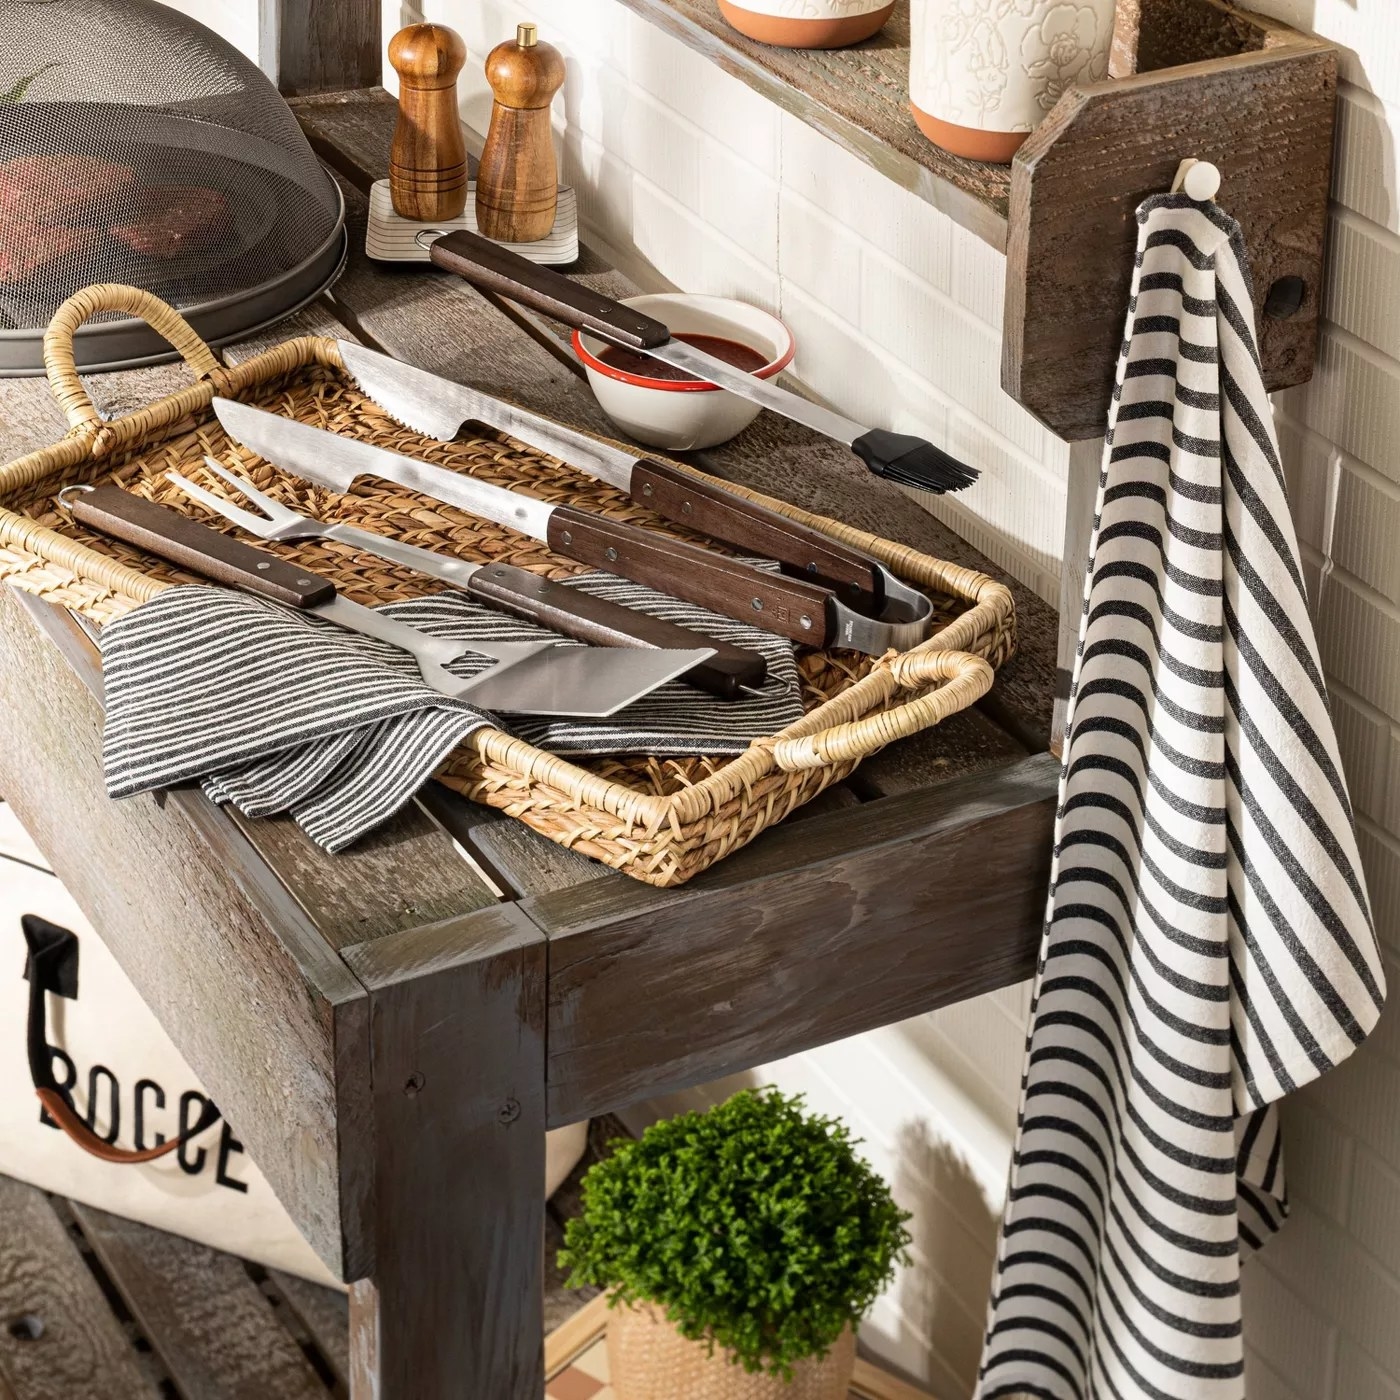 The grilling set with the four wooden and metal tools next to a grill